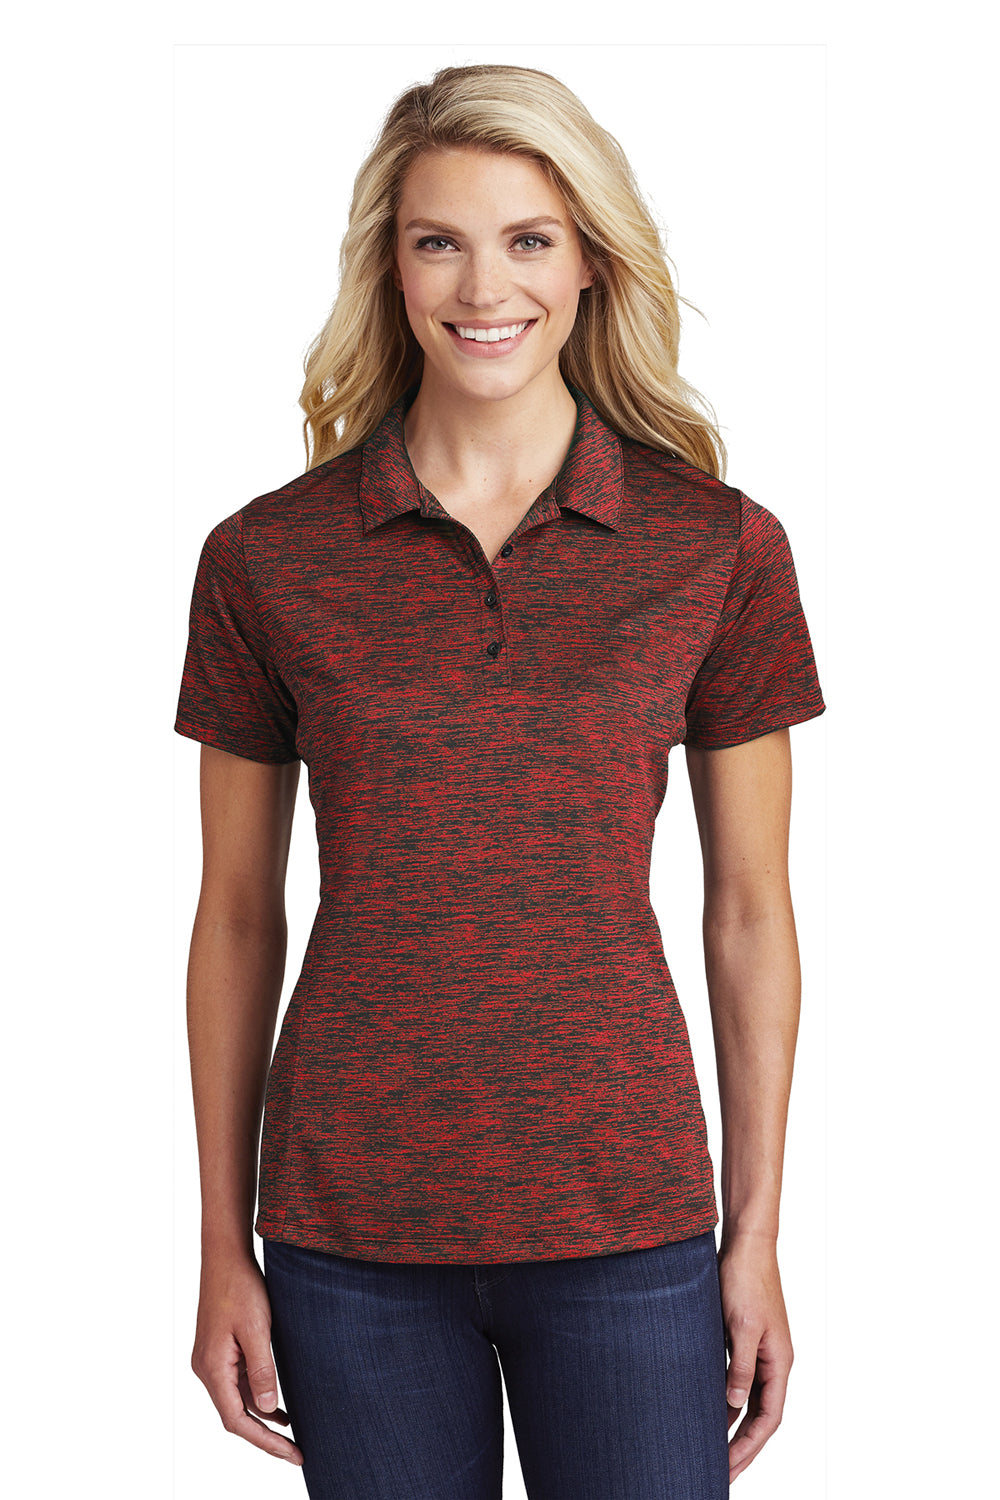 Sport-Tek LST590 Womens Electric Heather Moisture Wicking Short Sleeve Polo Shirt Deep Red/Black Electric Front